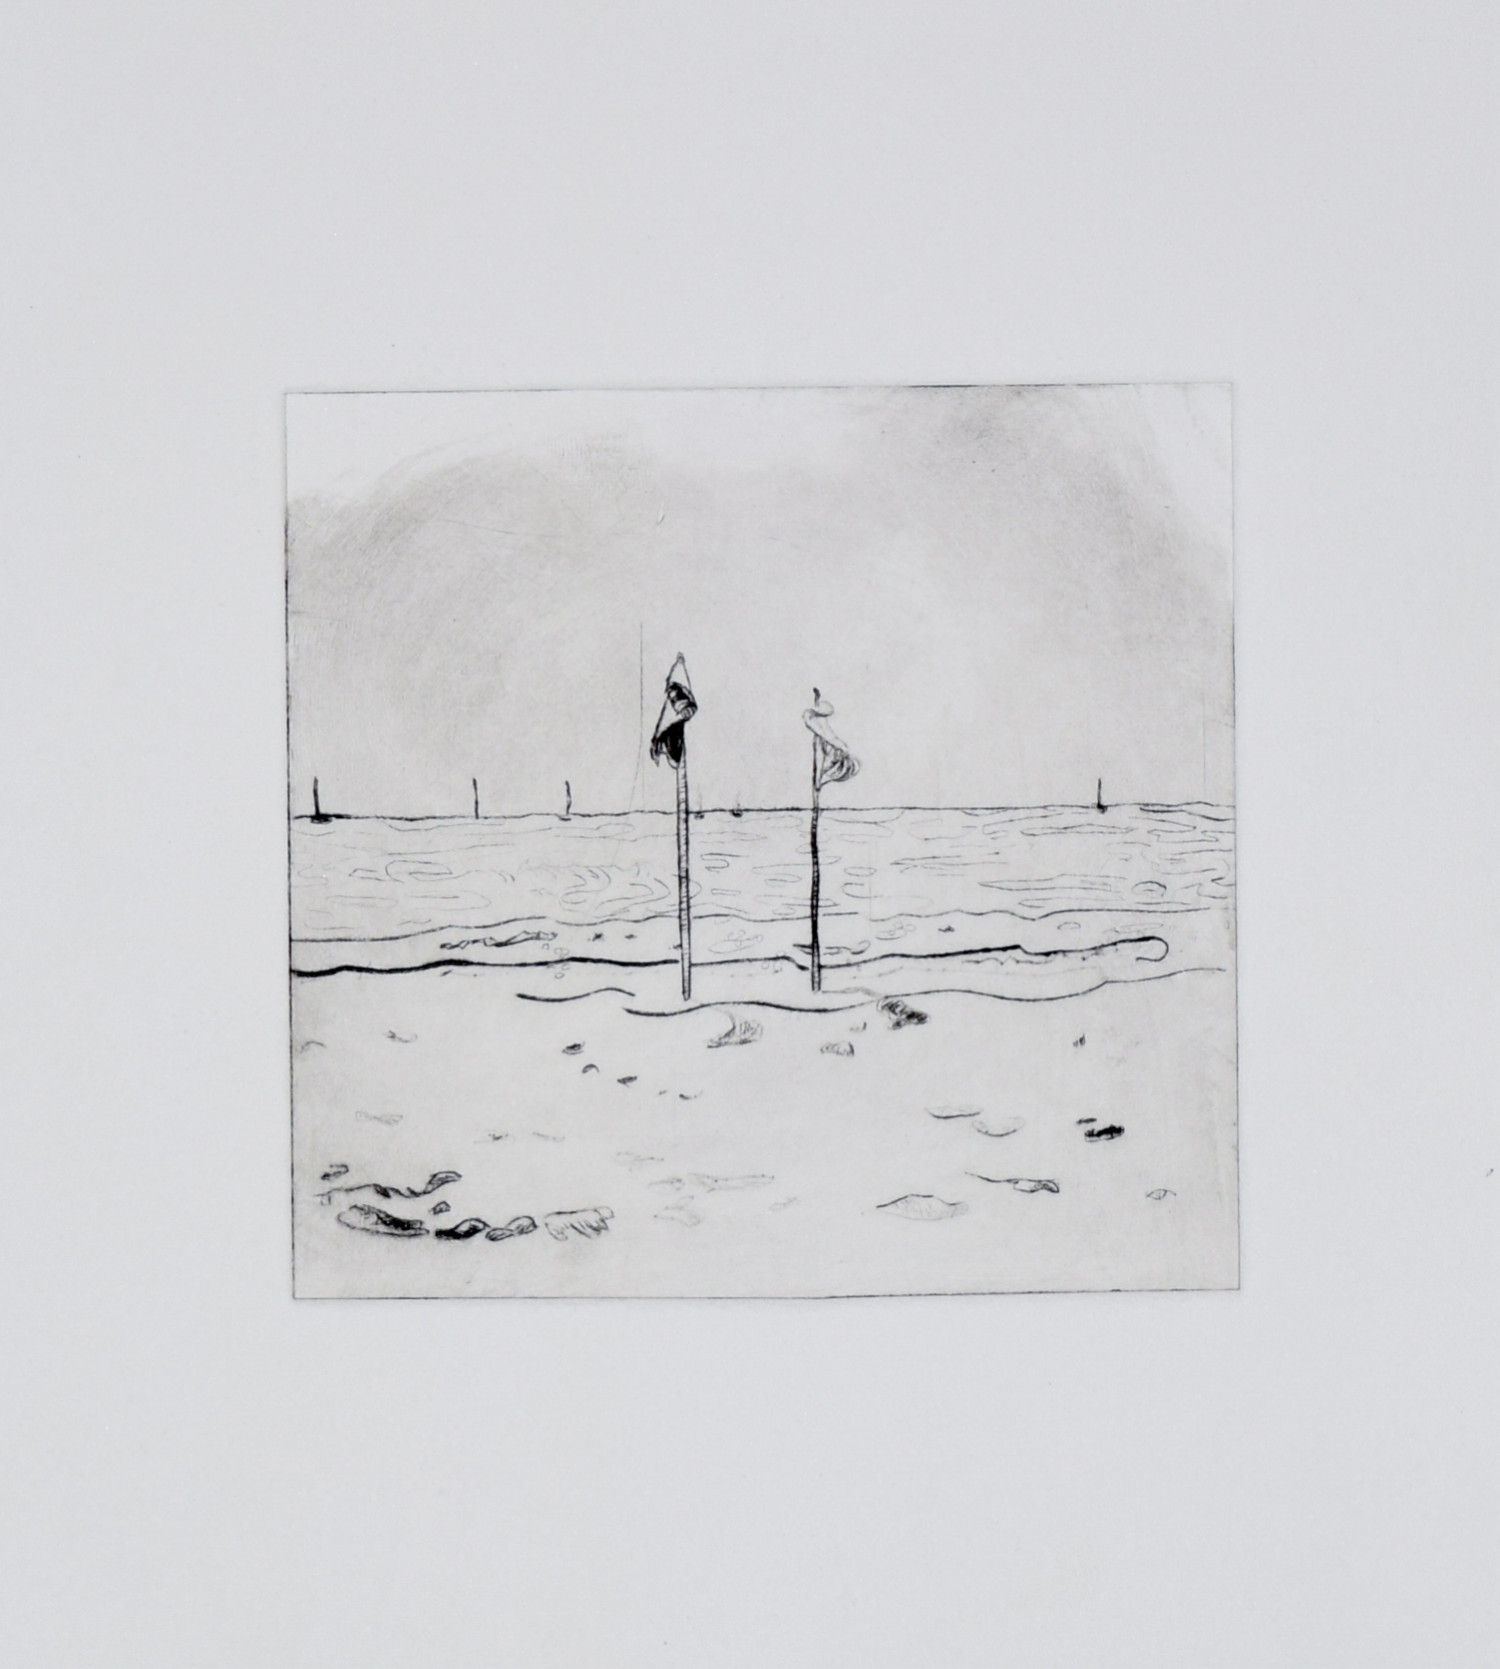 *Point Lookout Beach Flags*, drypoint print, 10 x 10cm